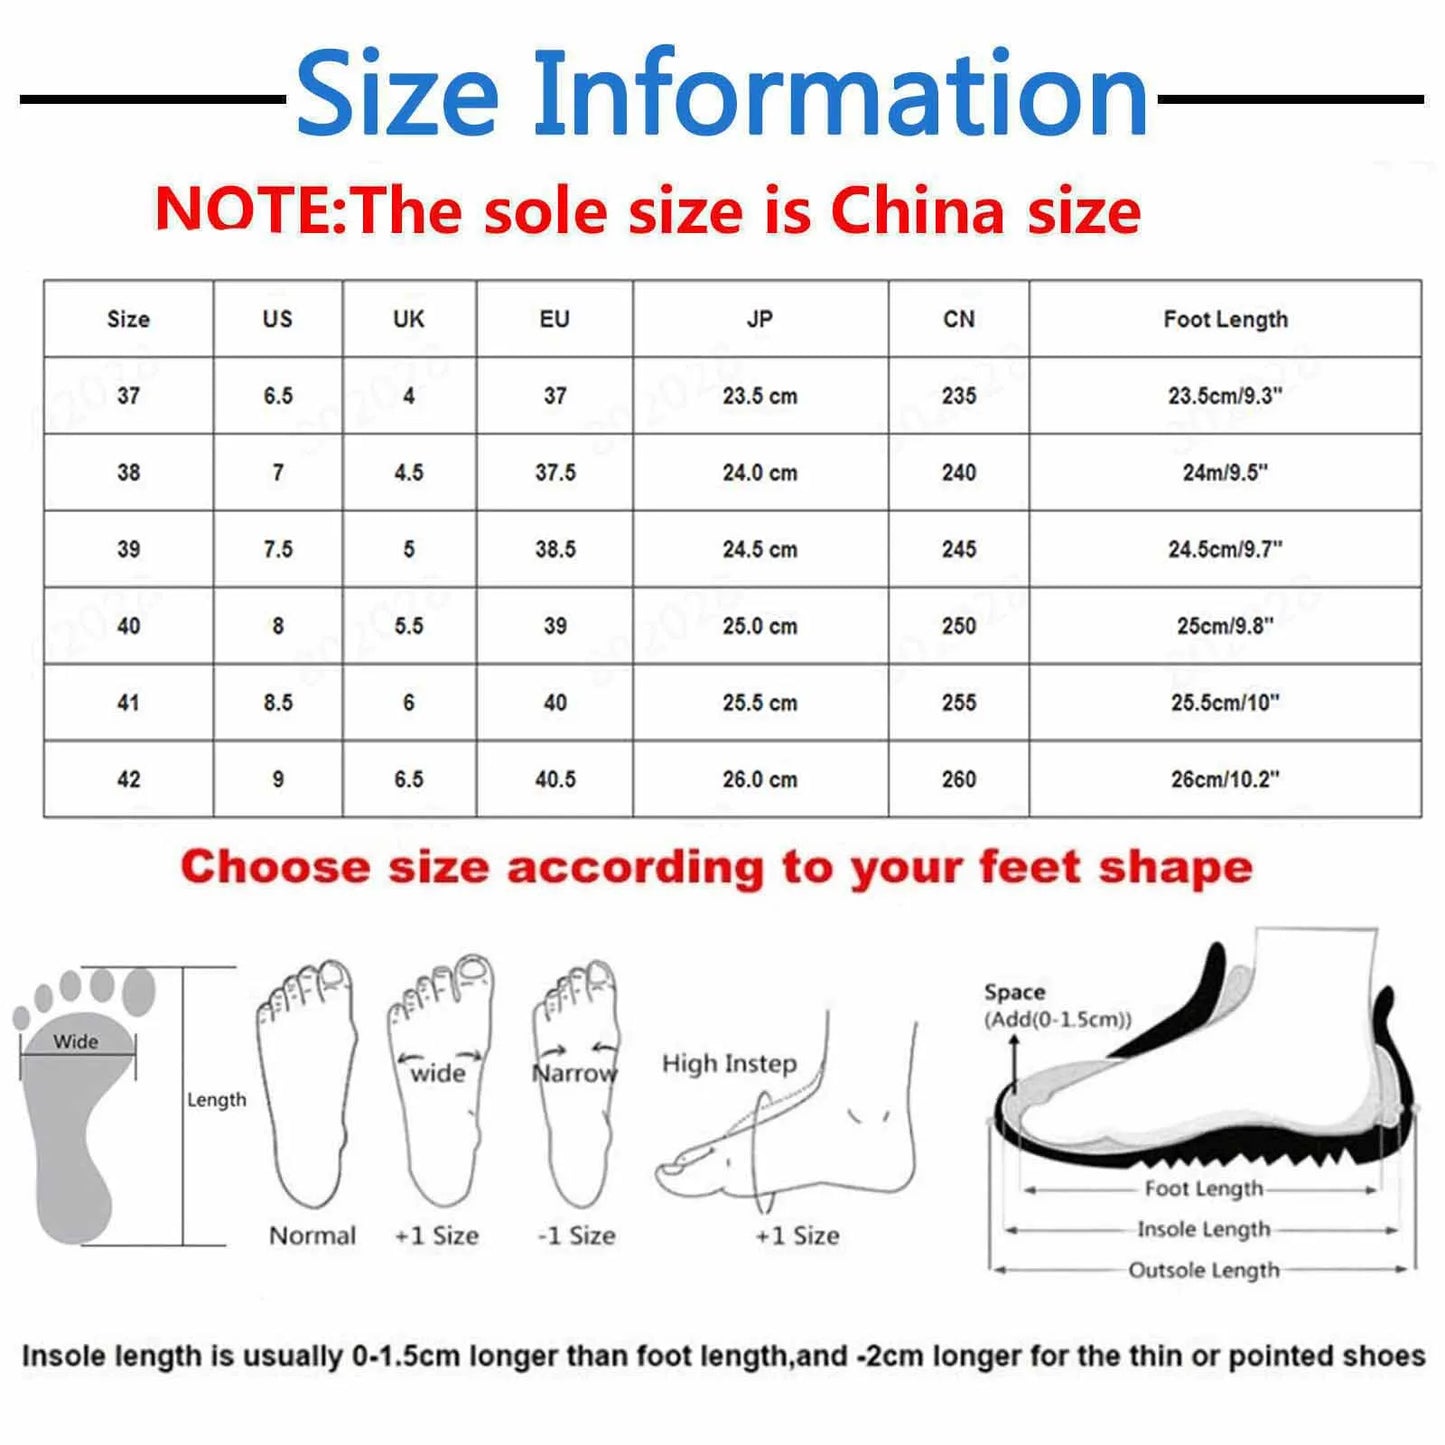 Leopard Print Casual Shoes For Women/Spring Autumn Round Toe Flat Bottom Lace Up